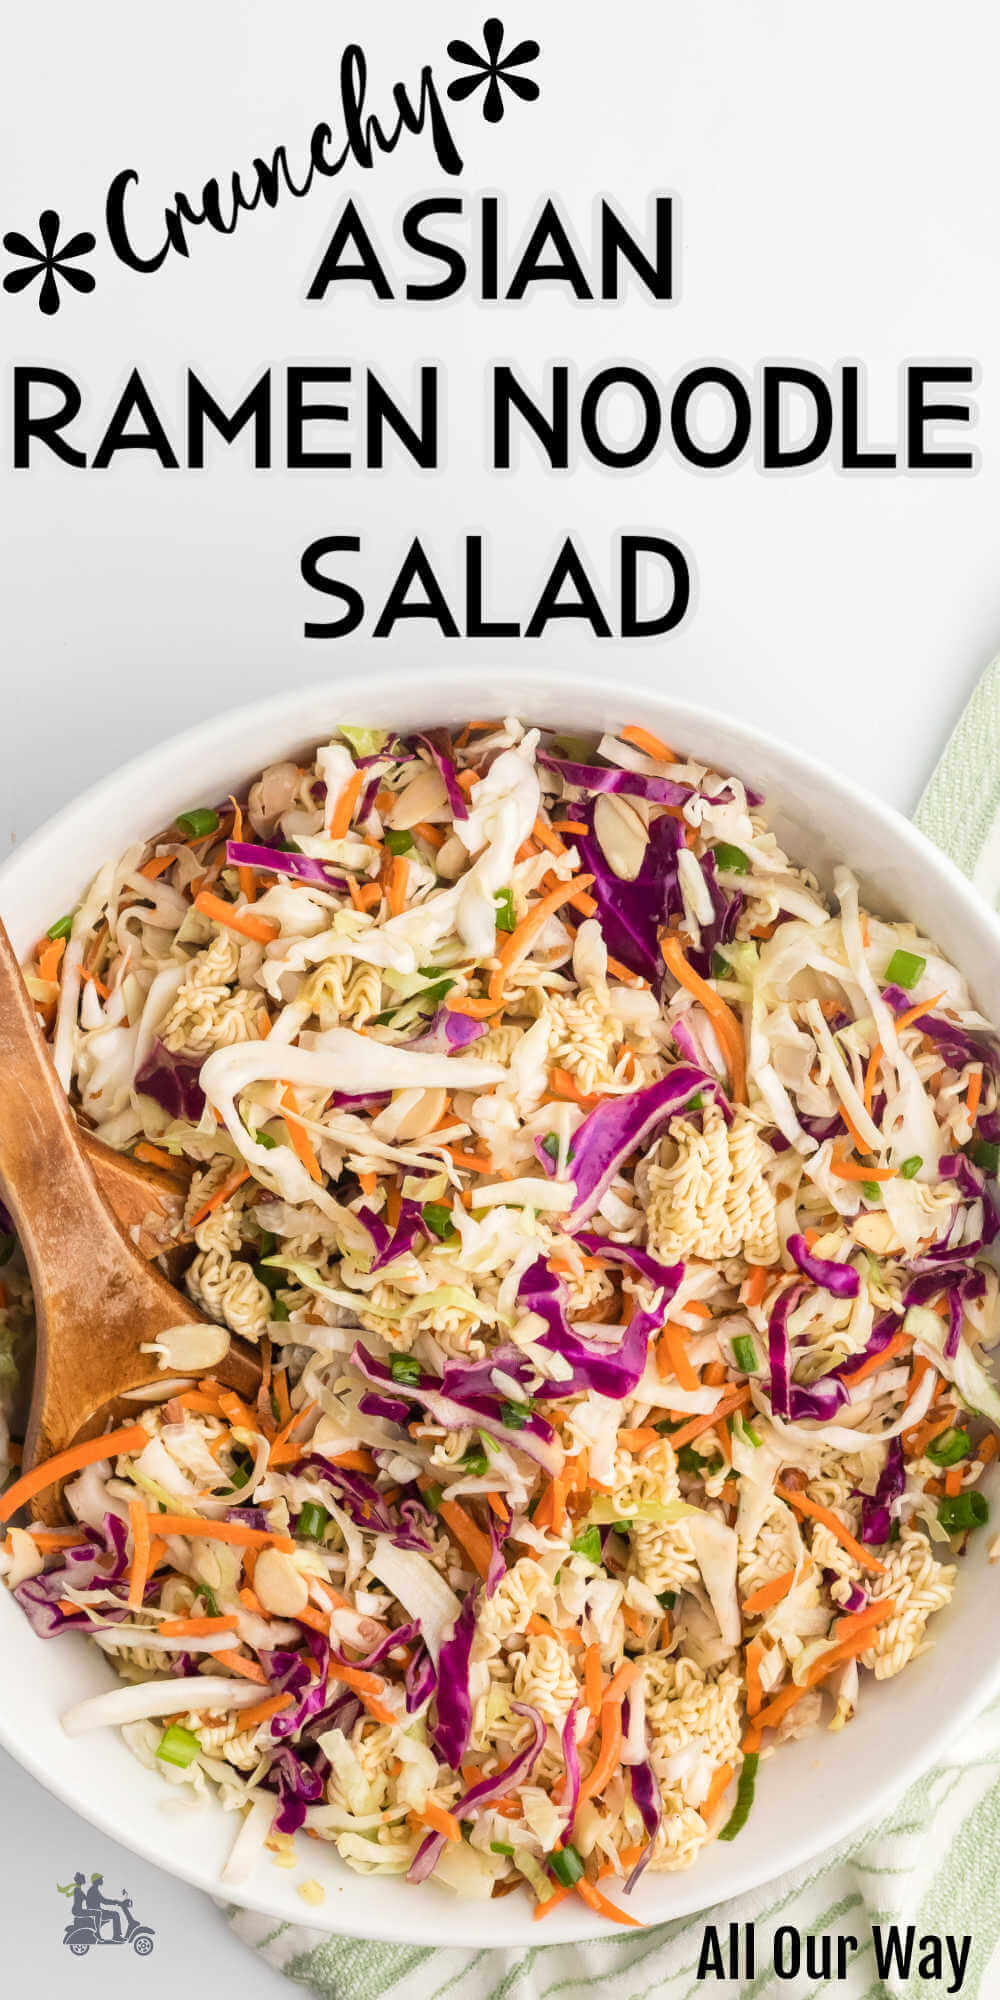 This Ramen Noodle Salad is an Asian-inspired cold side salad made with crunchy instant ramen noodles, coleslaw mix, sauteed veggies, toasted almonds, and tossed in a tangy dressing. Enjoy it alongside shrimp, salmon, steak, pork chops, or chicken.